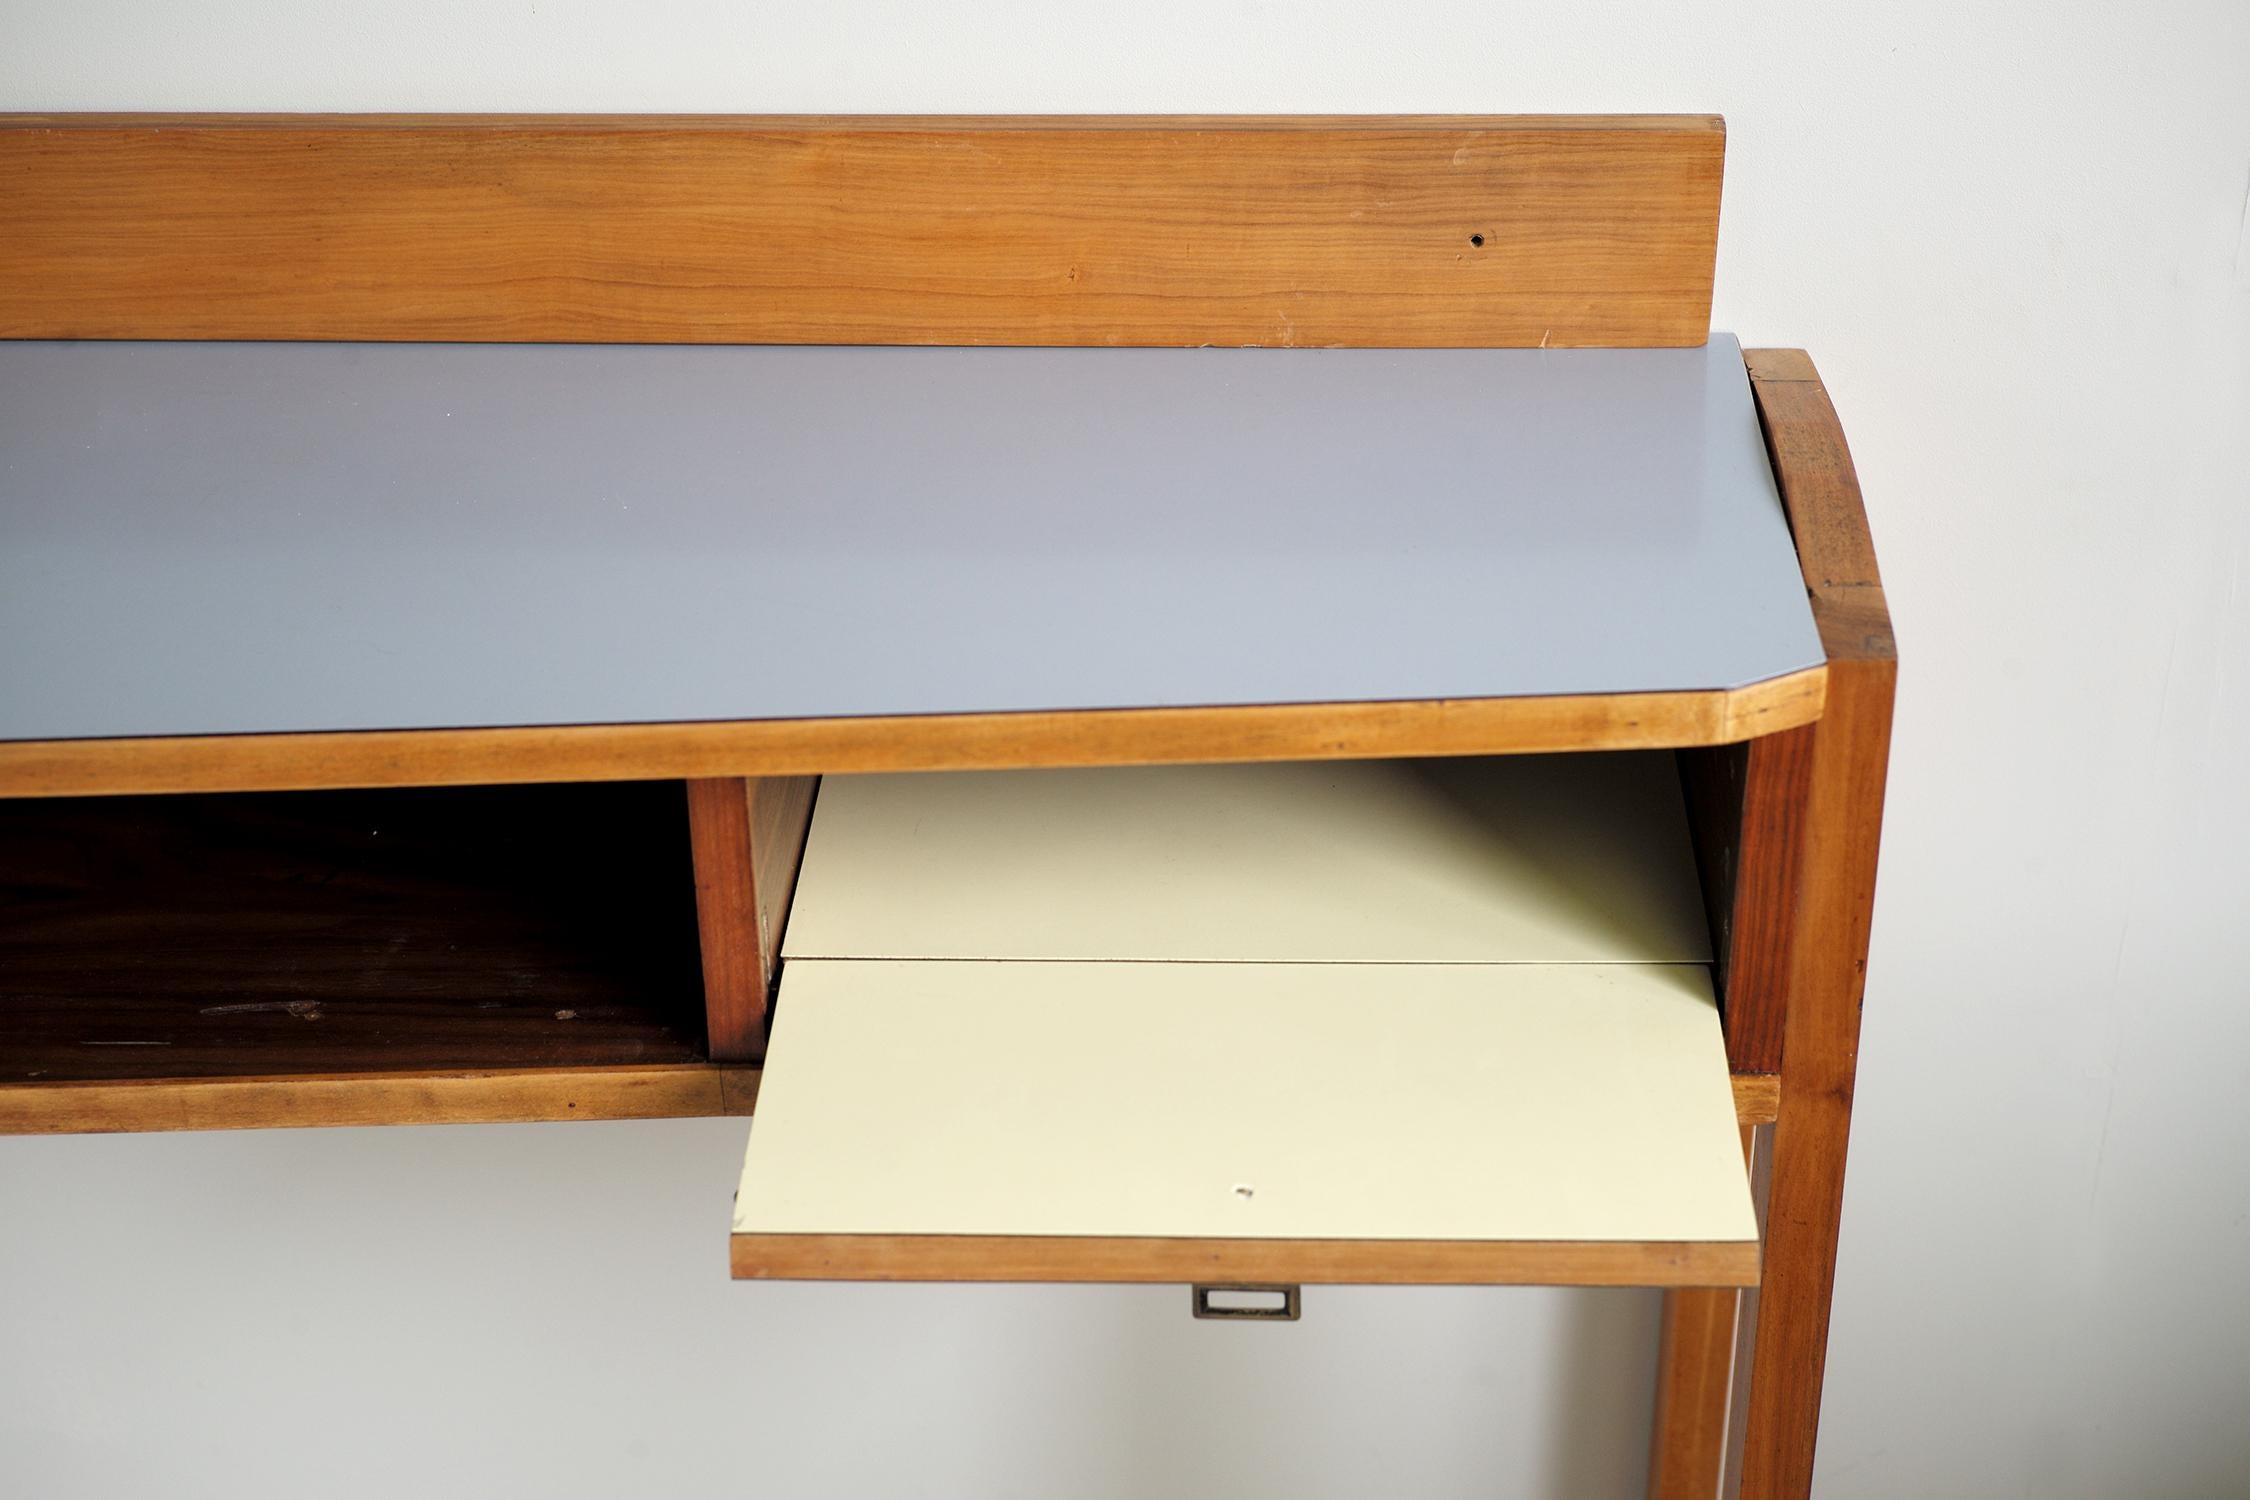 Large wall console in walnut and gray and yellow Formica, Italy, 1955.
The cradle base screwed on the sides reinforces the wall hook, (fixing holes in the interior niches). Topped with a plinth and fitted with a flap locker, this copy is one of the